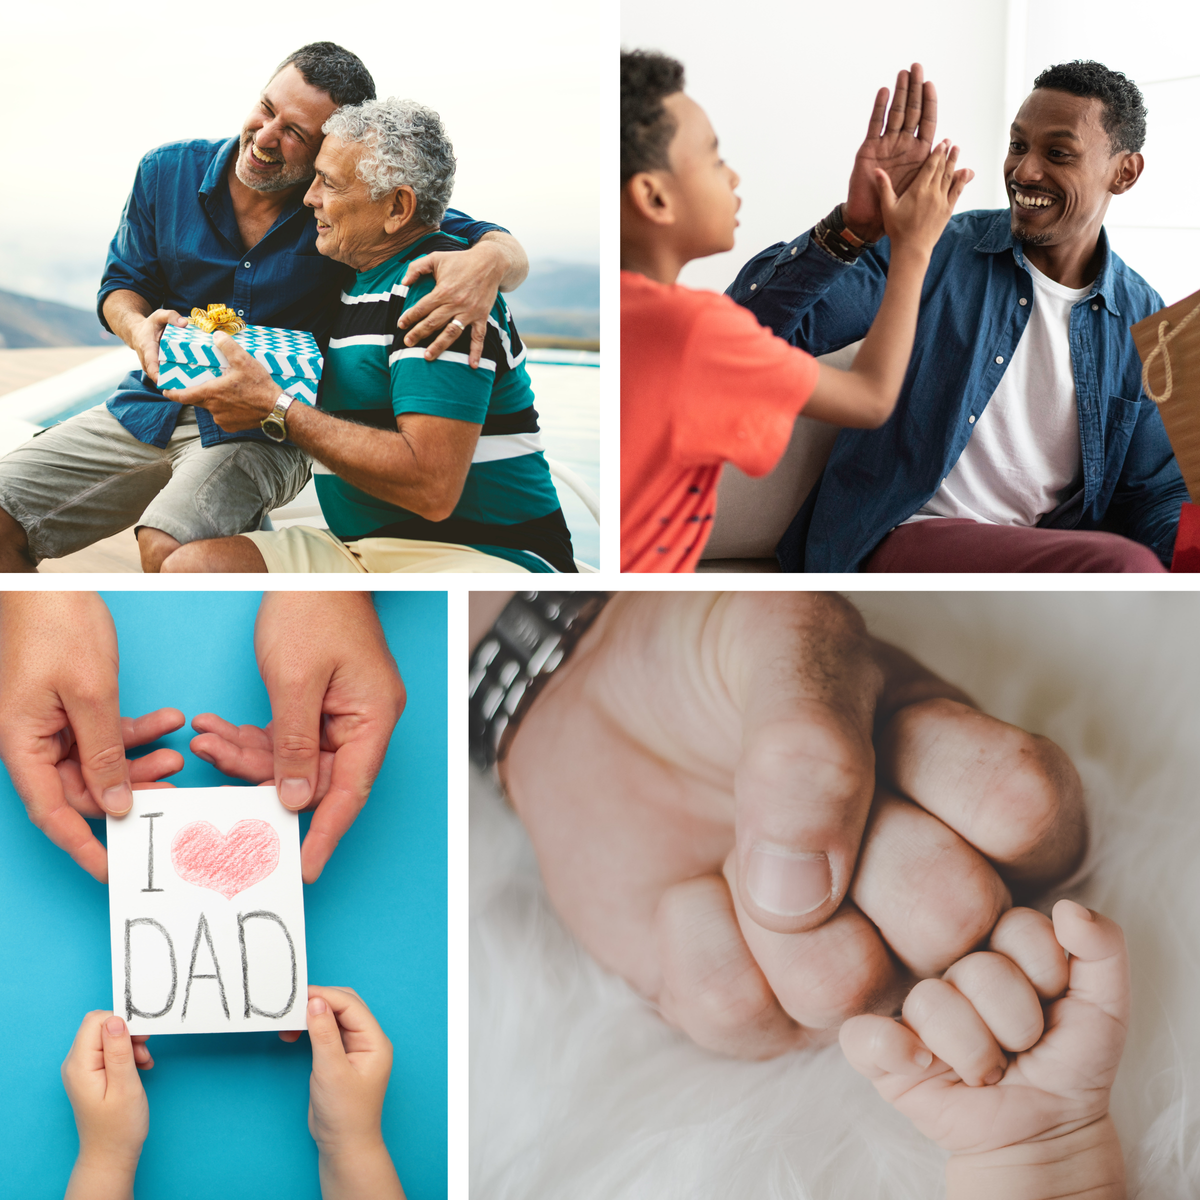 adult man with father, young man and son, new dad fist bumping baby hand, kid giving dad Father's Day card.